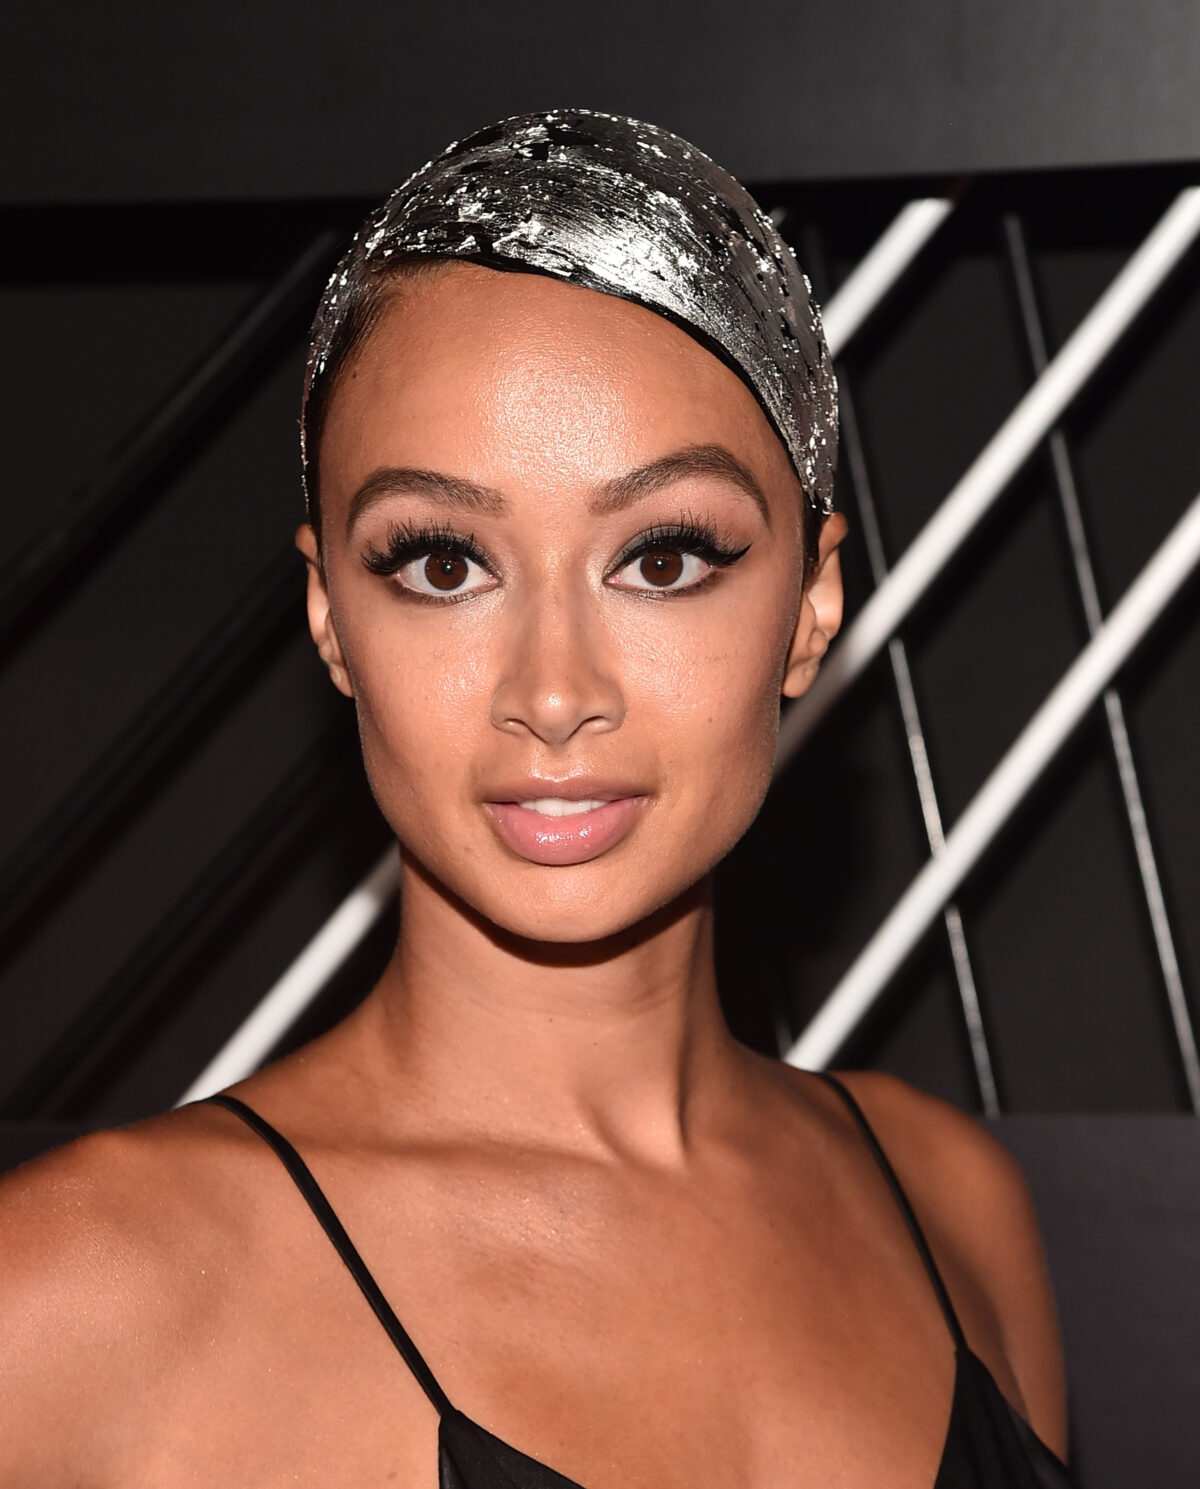 Media personality, fashion designer and model Draya Michele in images